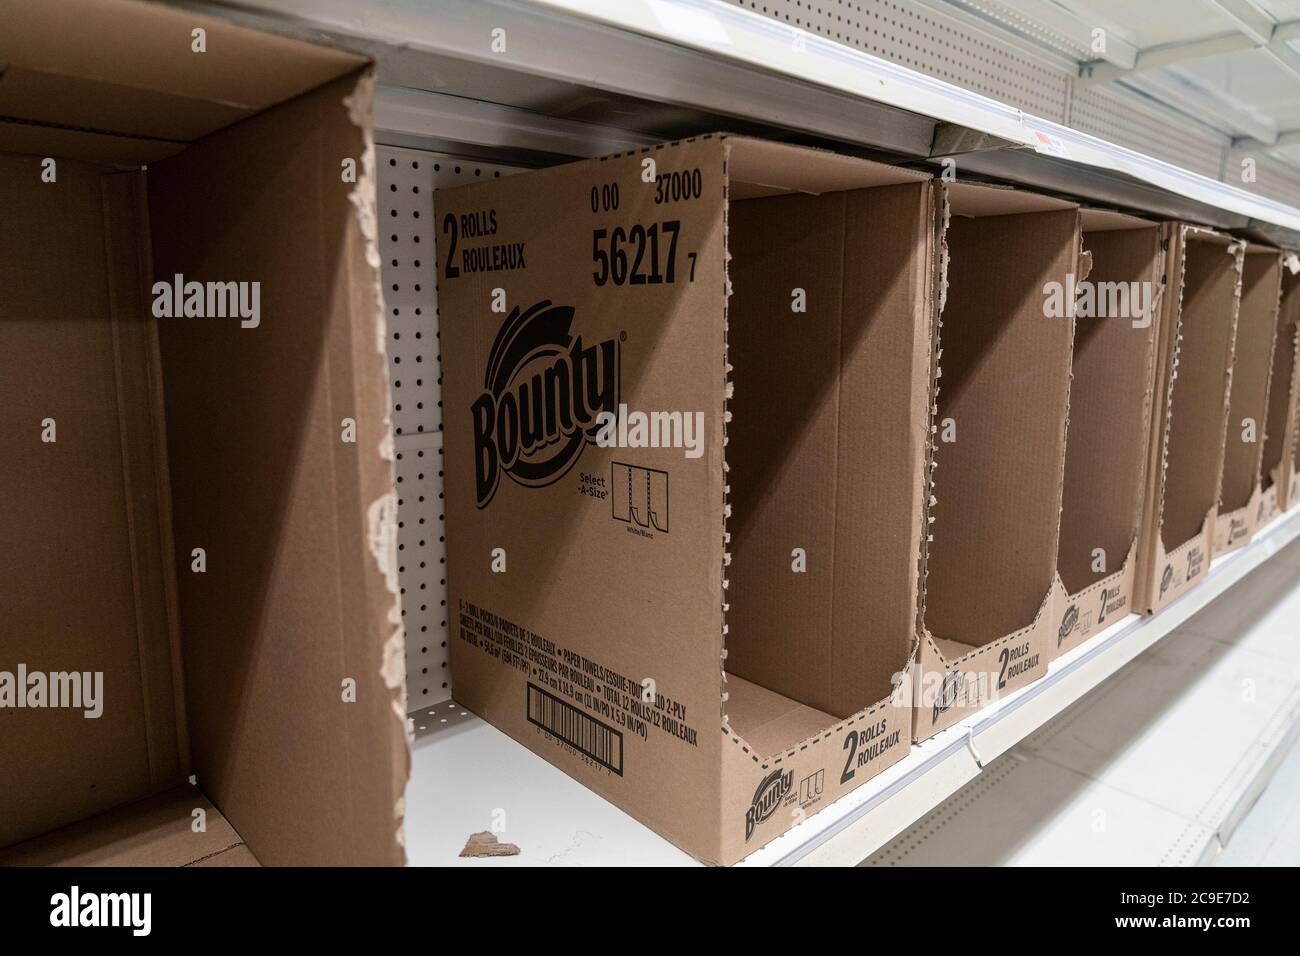 Lima - Circa July 2020: Procter & Gamble Lima manufacturing plant. P&G is  the world's biggest advertiser with dozens of consumer brands and products  Stock Photo - Alamy